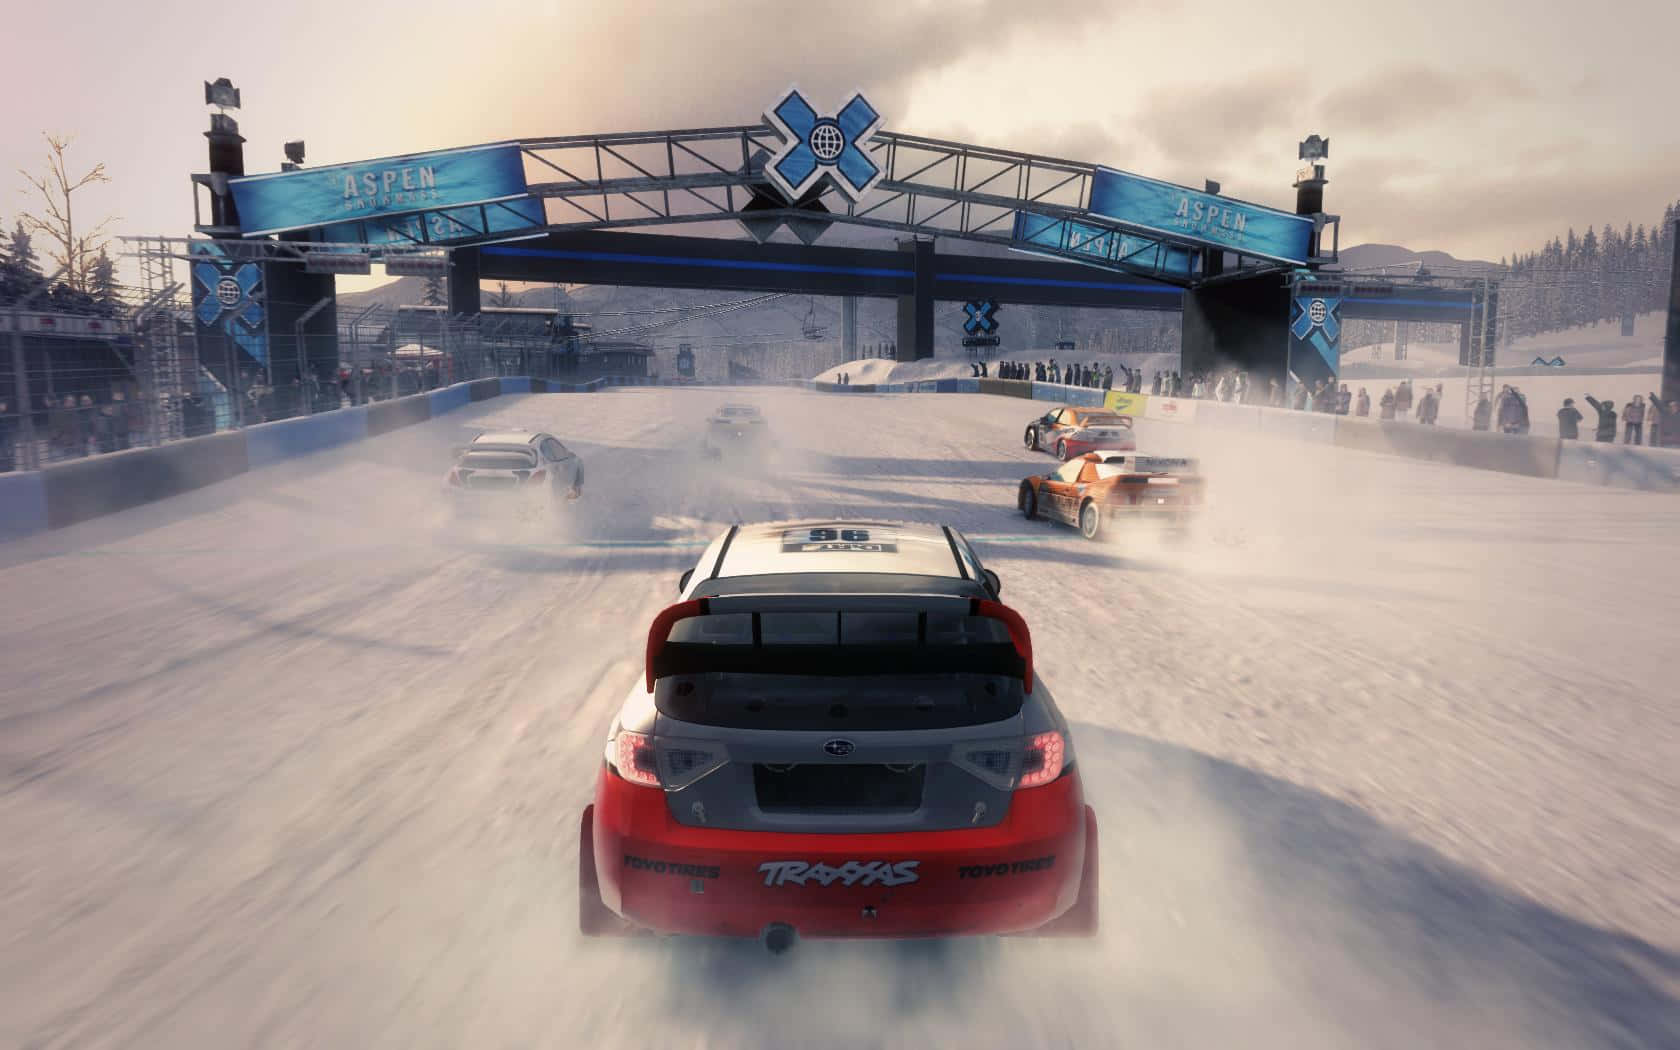 A Screenshot Of A Game With Cars Driving Down A Snowy Road